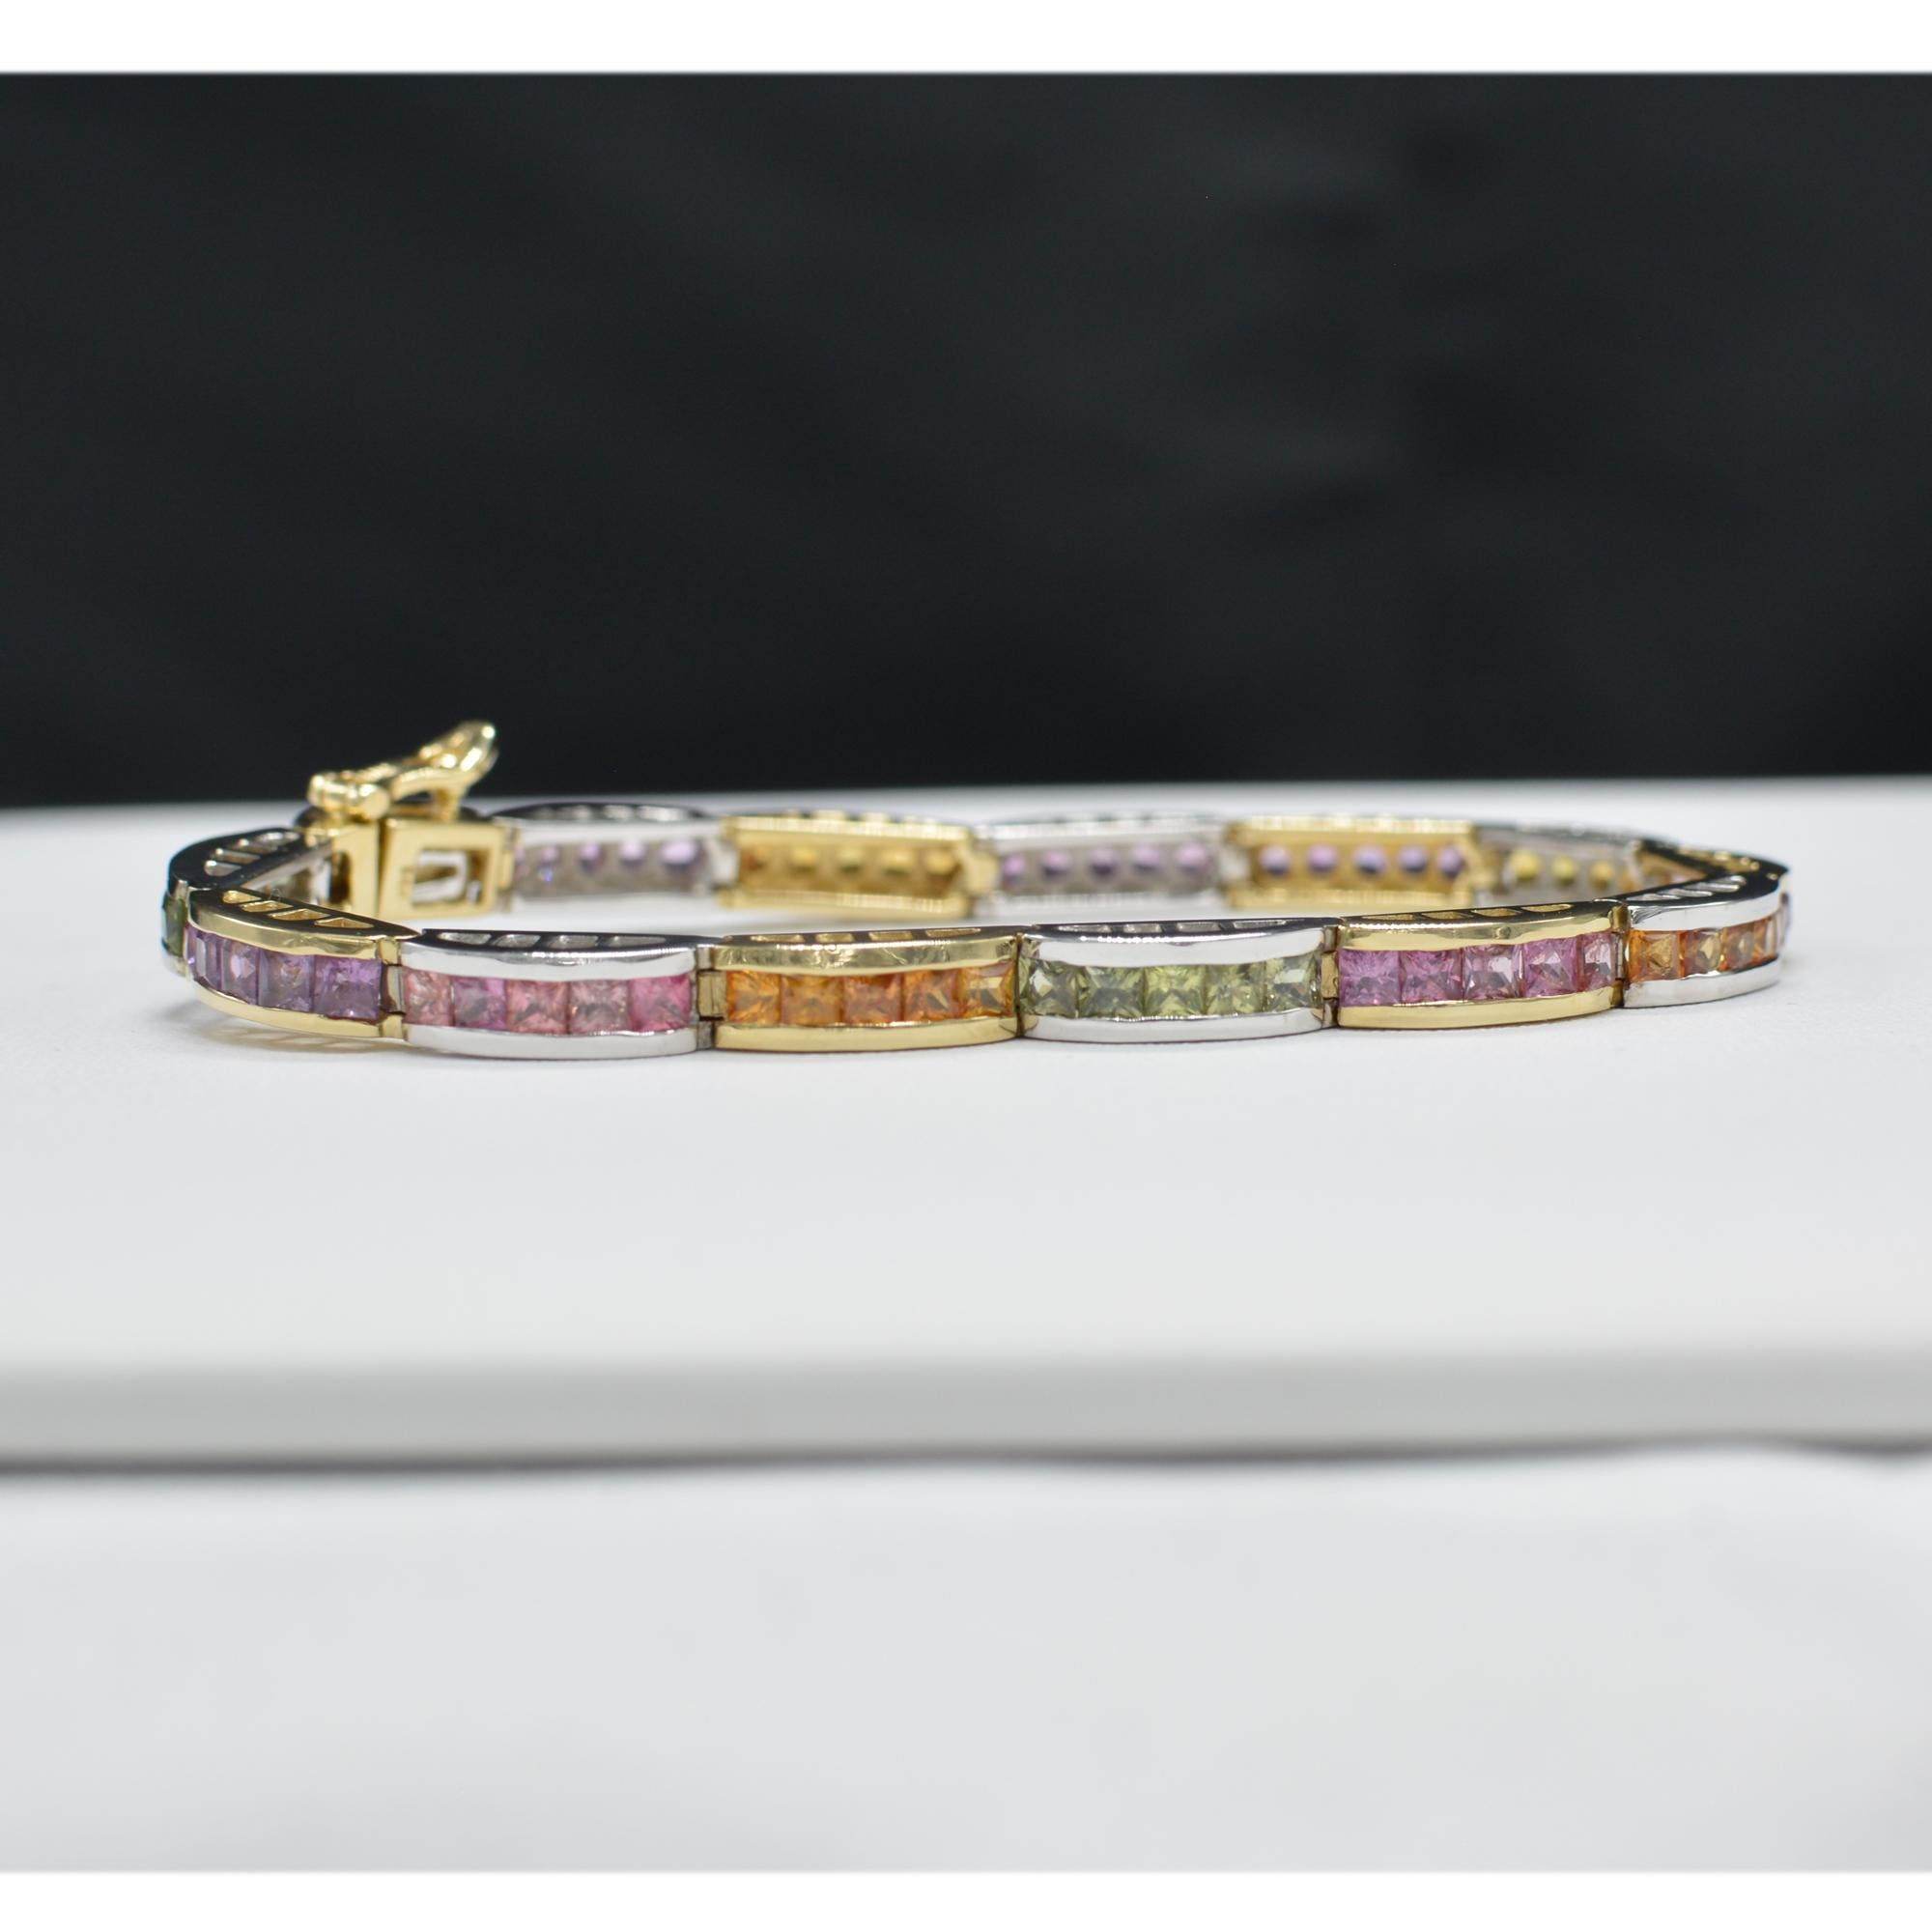 Channel Setting,
Multi color Sapphire Bracelet AAA Quality Sapphires Princess - cut shape, Total of 8.75 carat. 
14K White Gold 19.0 Grams.
Lenght 7' Inch.
Bracelet width is approx 4.6 mm
